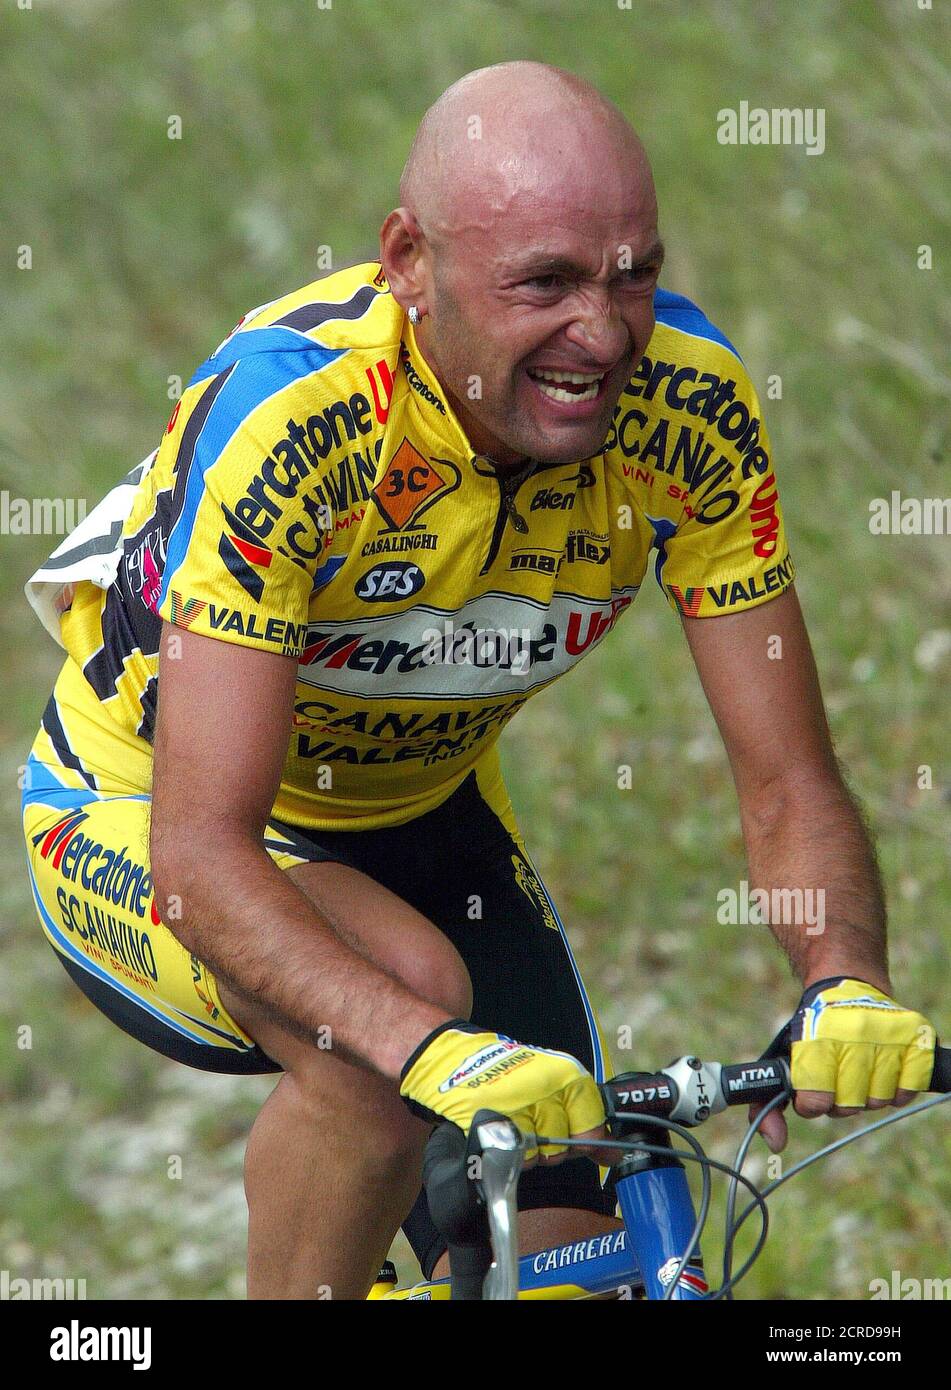 File photo shows Italy's Mercatone Uno rider Marco Pantani climbs a hill  during the 146km seventh stage from Avezzano to Terminillo of the Giro d' Italia May 17, 2003. Former Tour de France